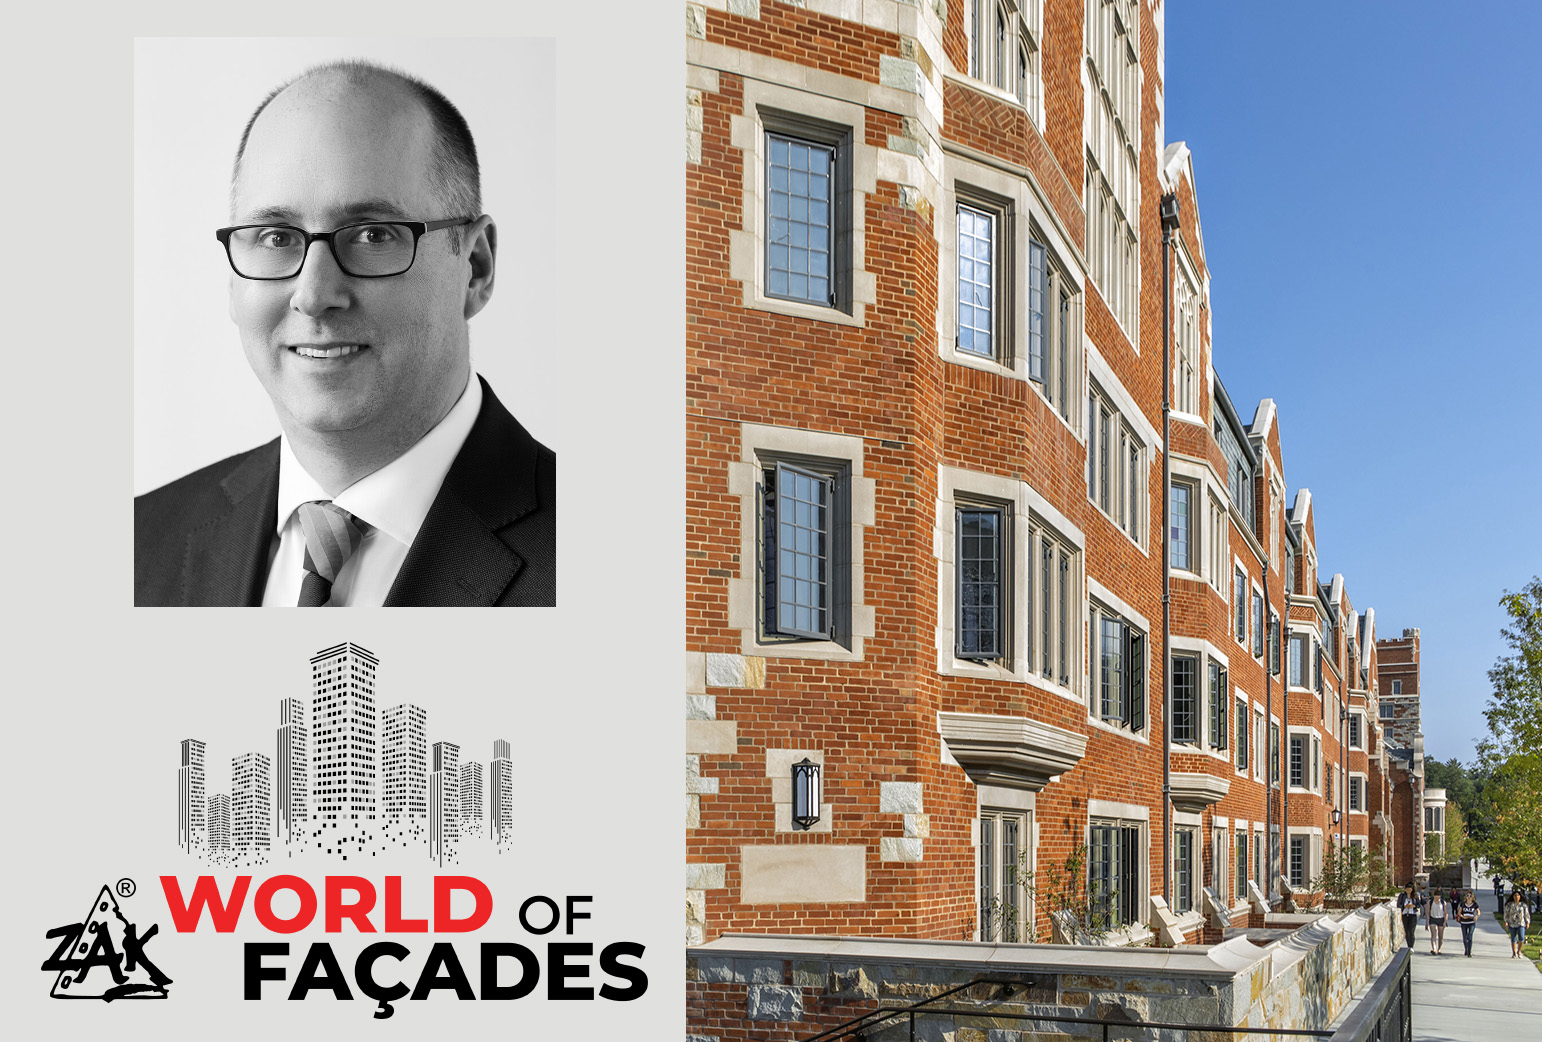 Kurt Glauber to Present at the Zak World of Facades Conference